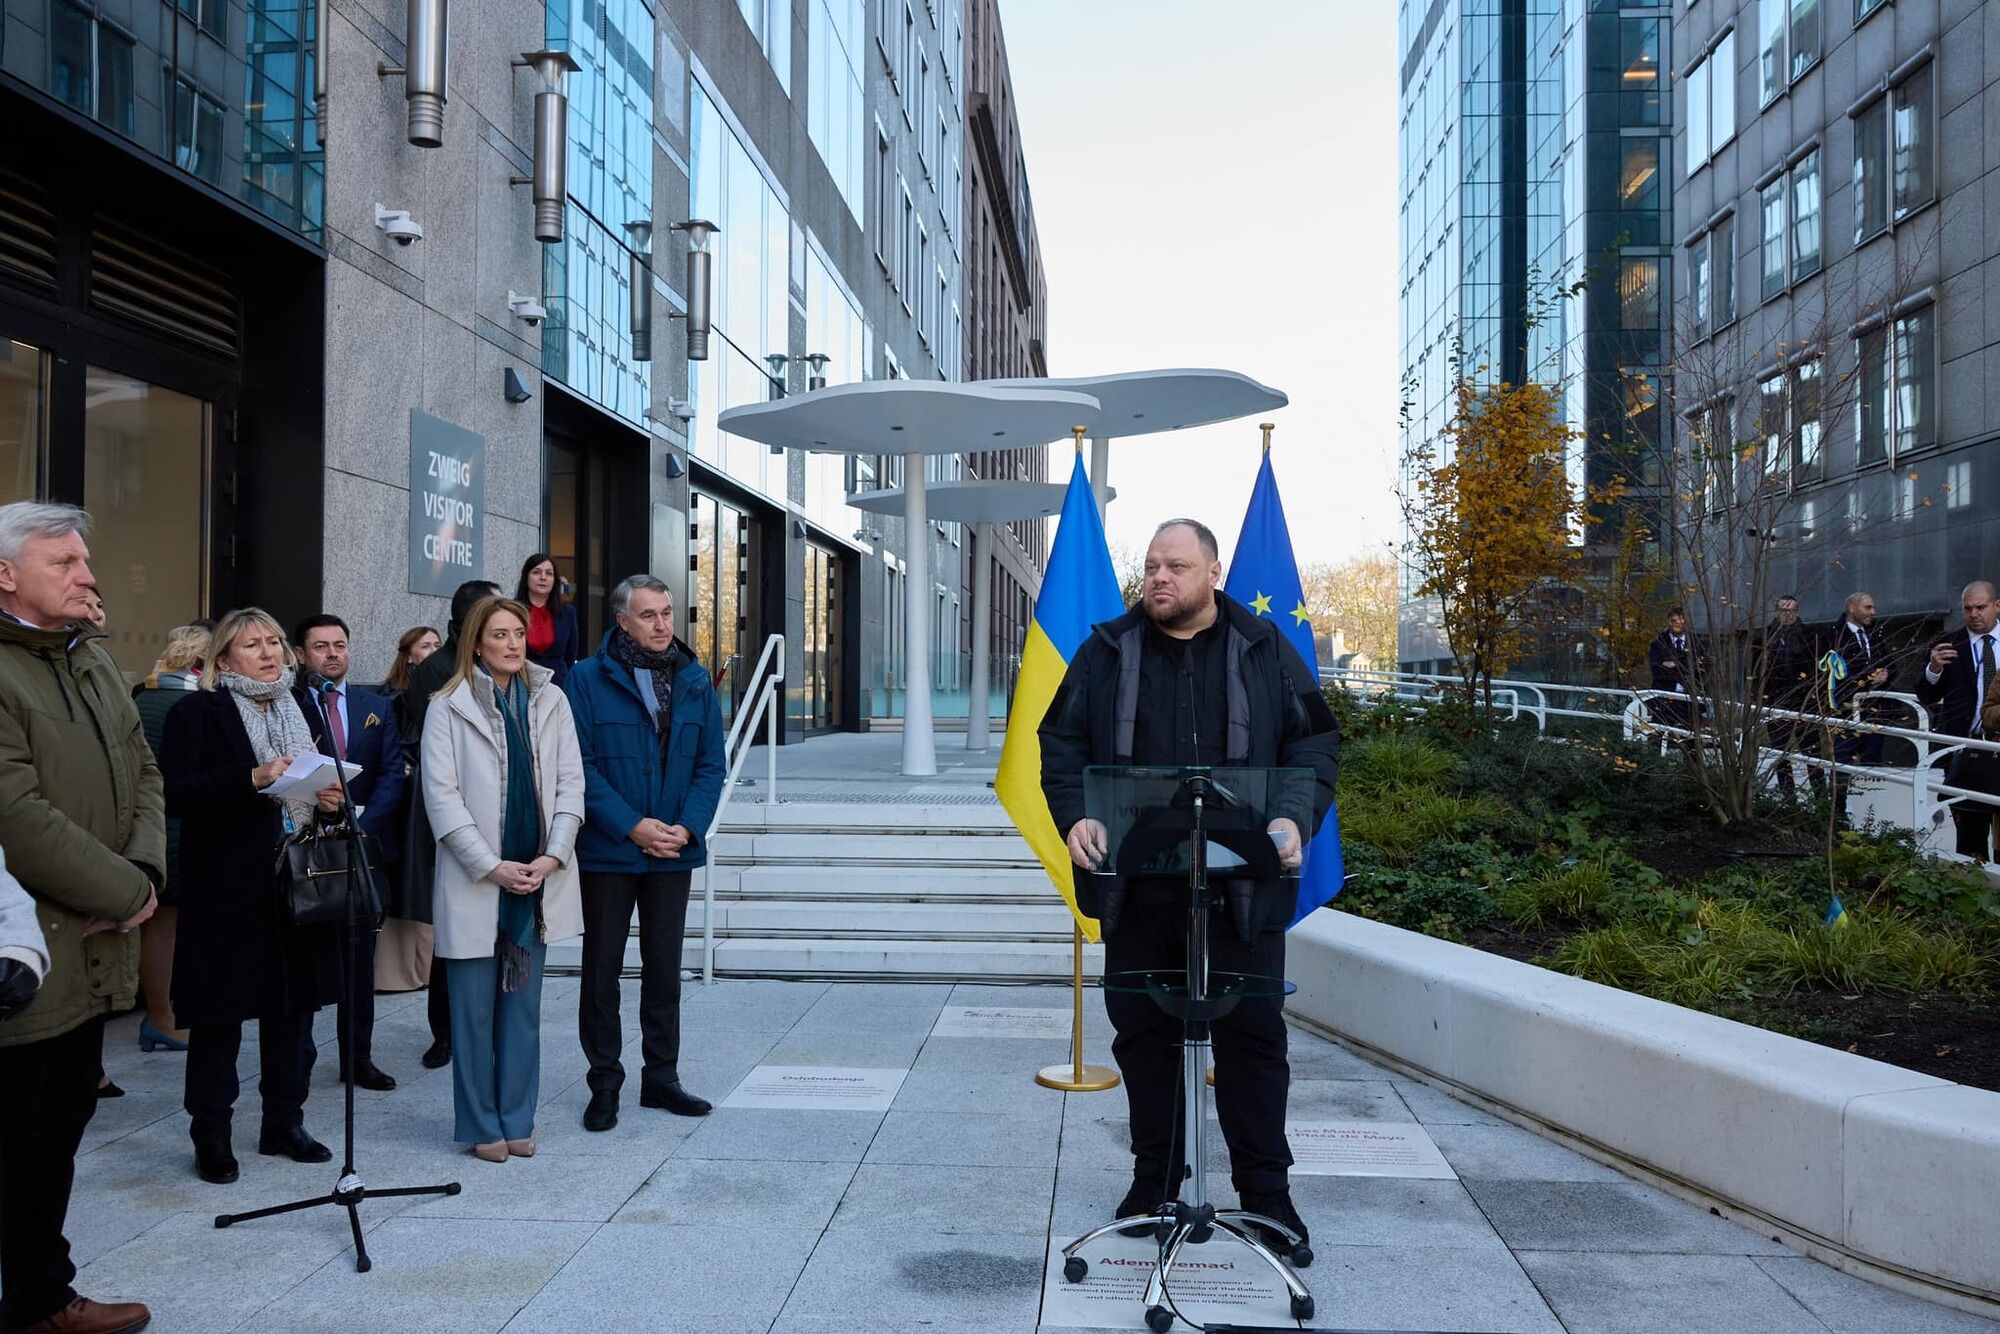 In support for Ukraine: a viburnum bush planted in front of European Parliament building. Photo